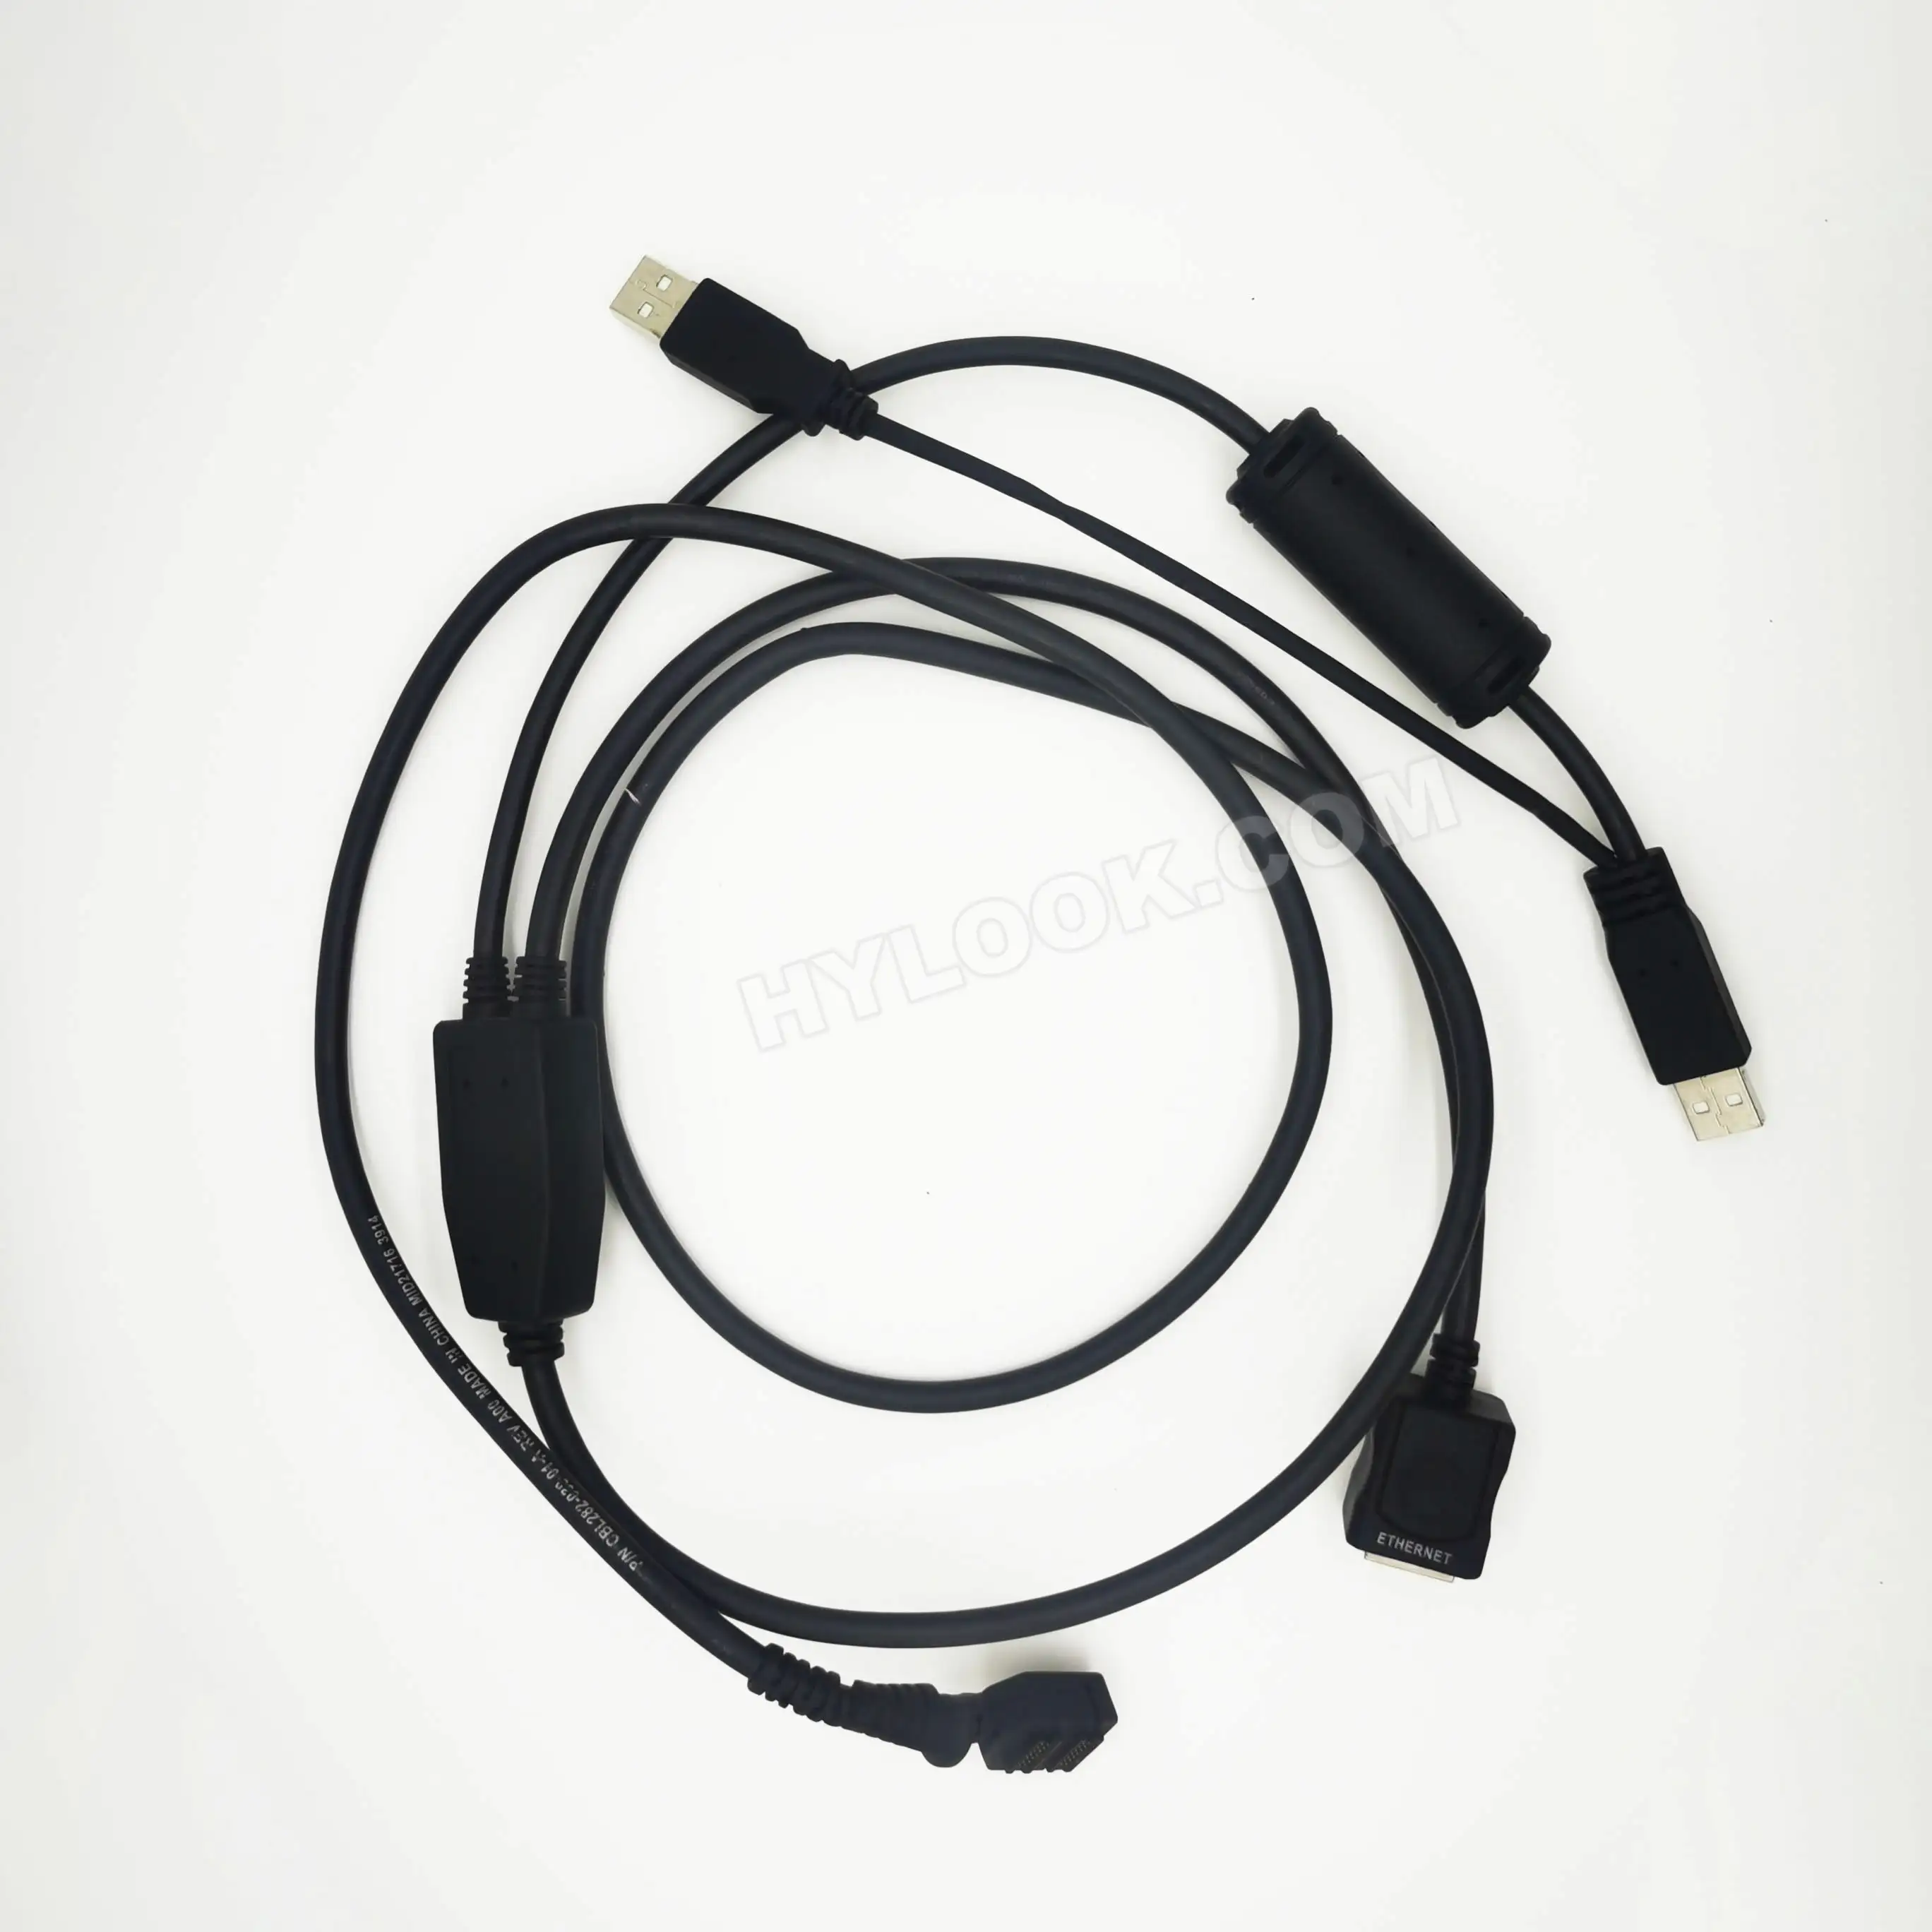 USB and Ethernet Cable for Verifone Vx810 Vx820 CBL282-039-01-A